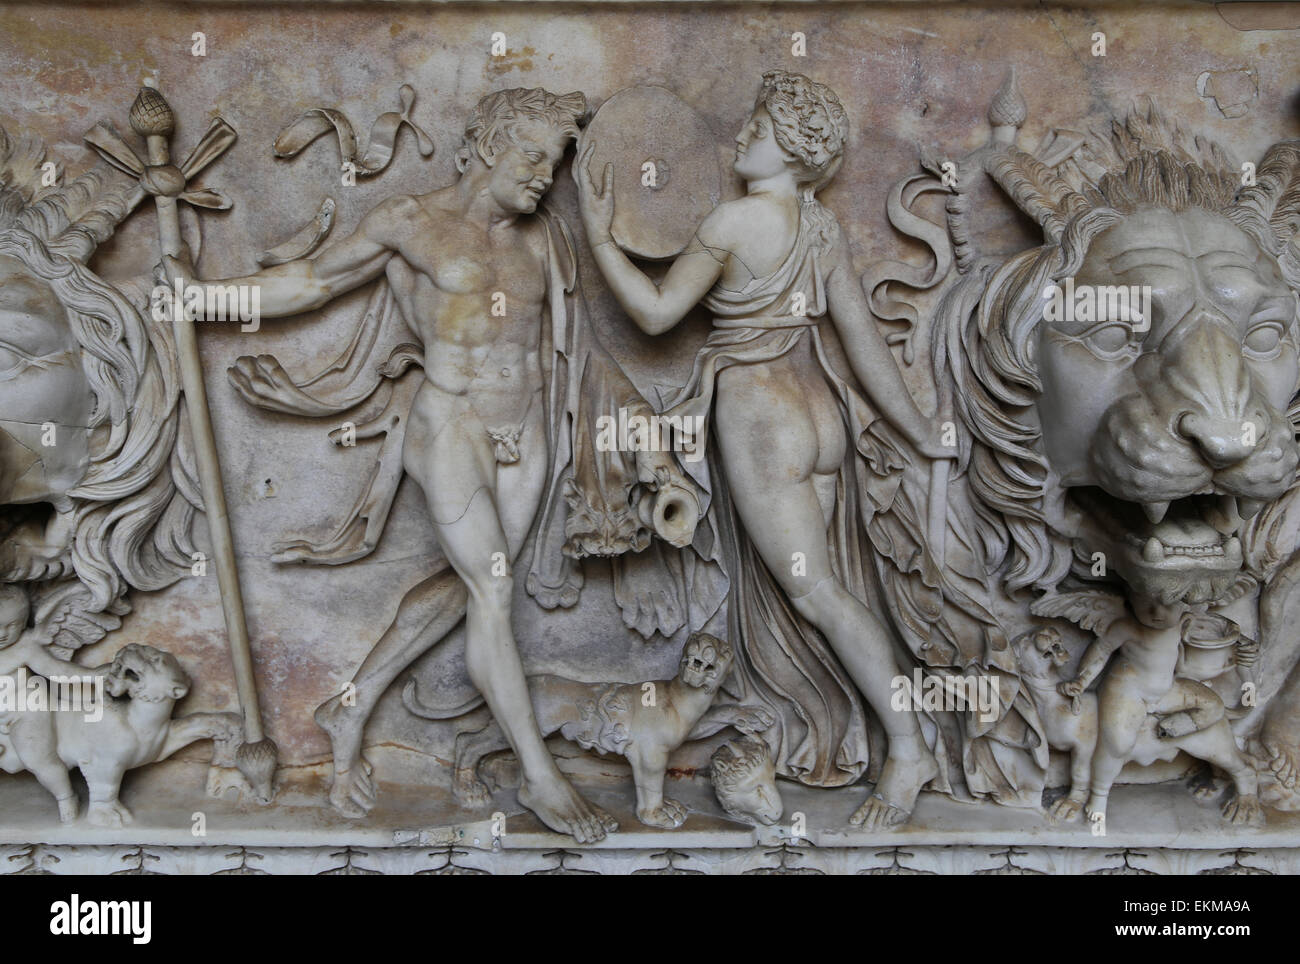 Sarcophagus. Dionysus in the center and Maenad (maybe Ariadne) baby cupid and panther. Roman. 150 AD. Stock Photo